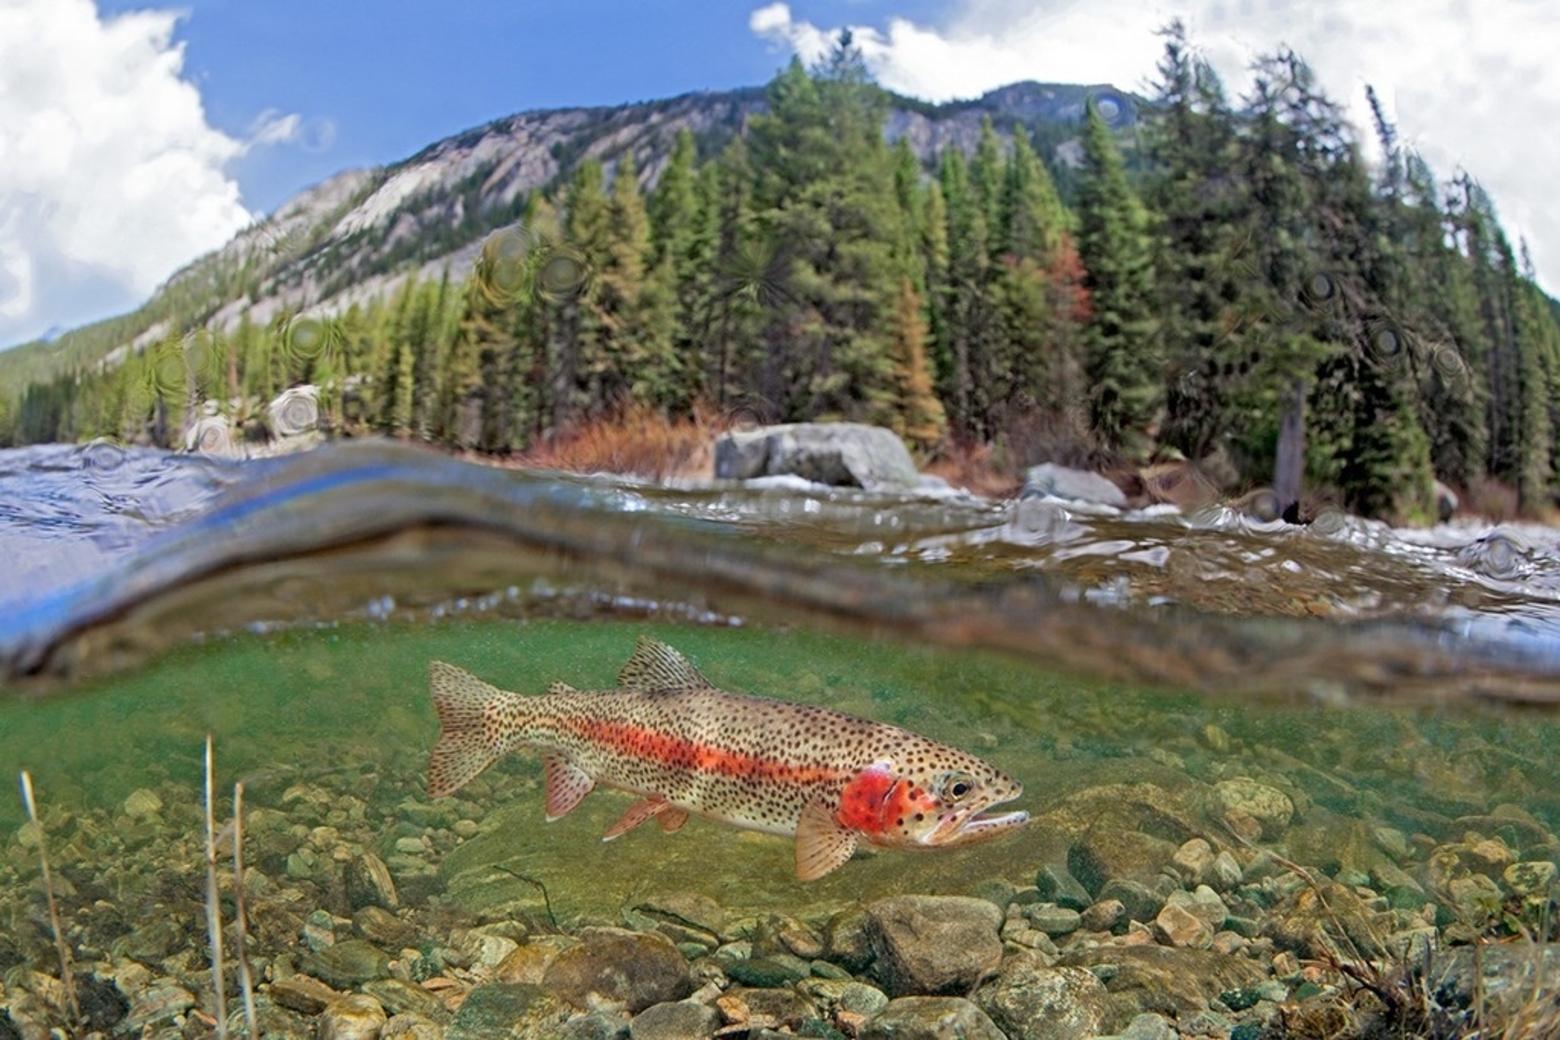 A rainbow trout navigates the current of the famous Gallatin River. Conservationists have expressed concerns about talk of releasing treated sewage from the Big Sky community into the blue-ribbon trout stream. Photo courtesy Pat Clayton